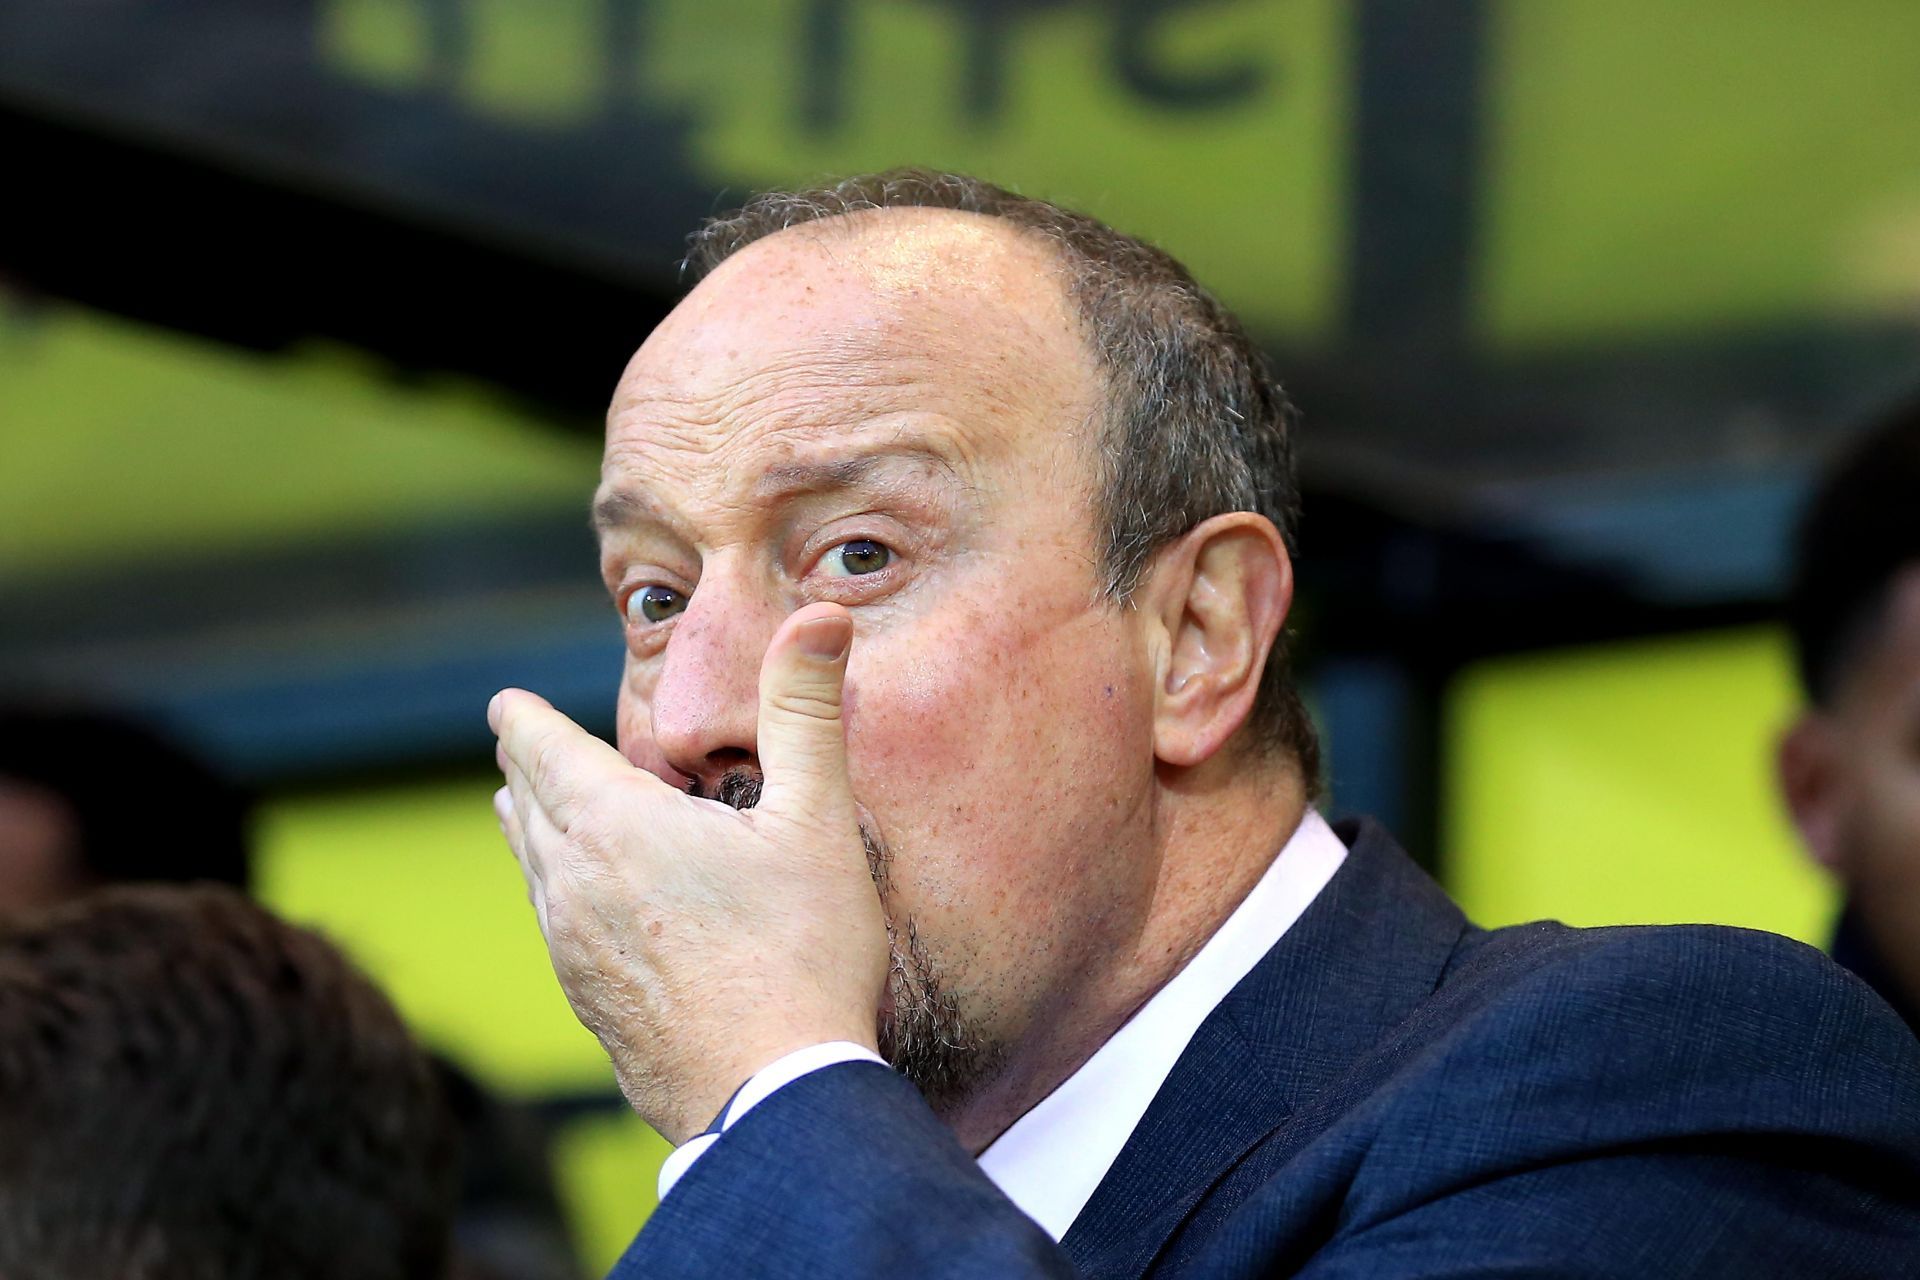 Rafael Benitez believes Potter has to deal with expectations at Stamford Bridge.